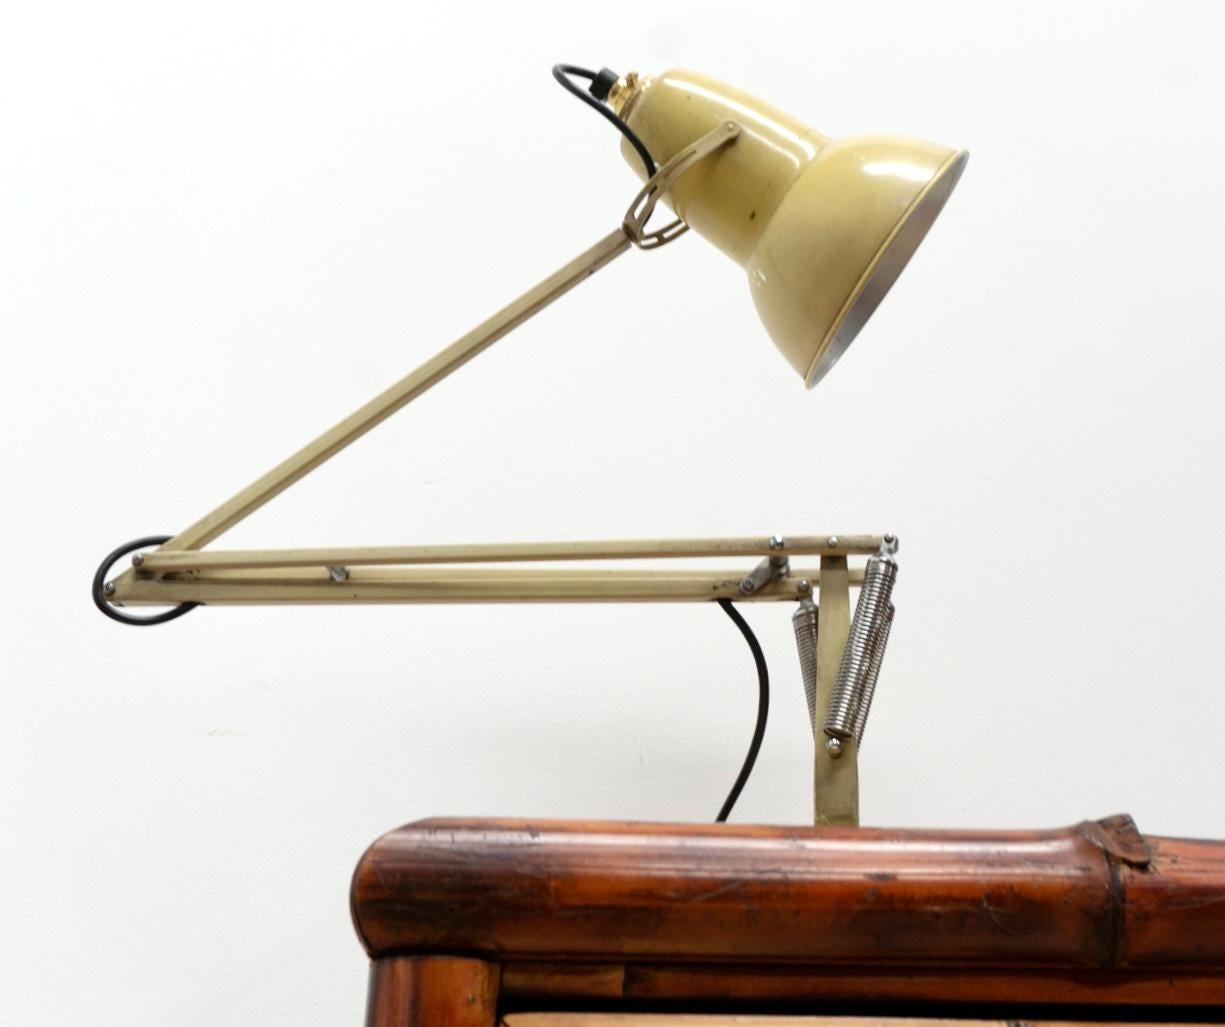 Original Herbert Terry Anglepoise Industrial Desk Lamp Model 1227 In Good Condition For Sale In Blackpool, GB